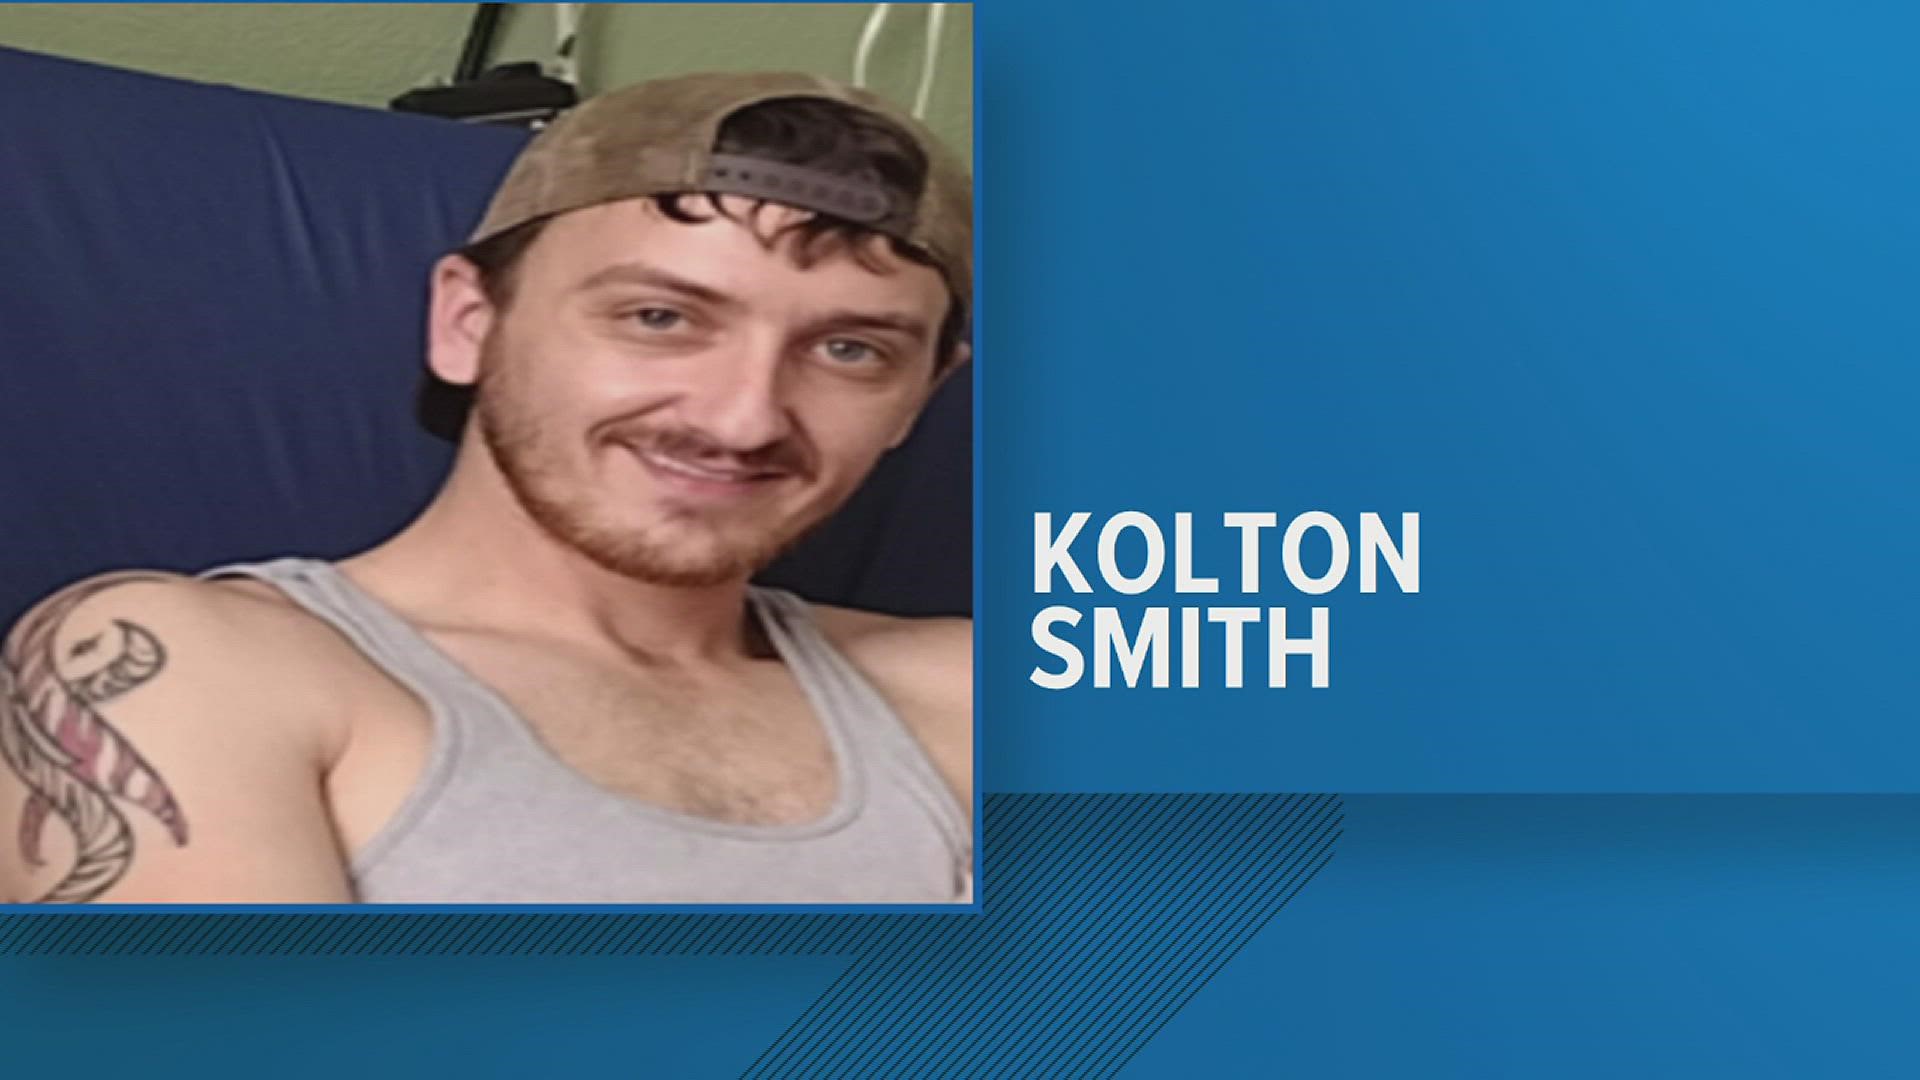 The Jasper County Sheriff's Office is asking for the public's assistance in finding a missing man who was last known to be in Louisiana.